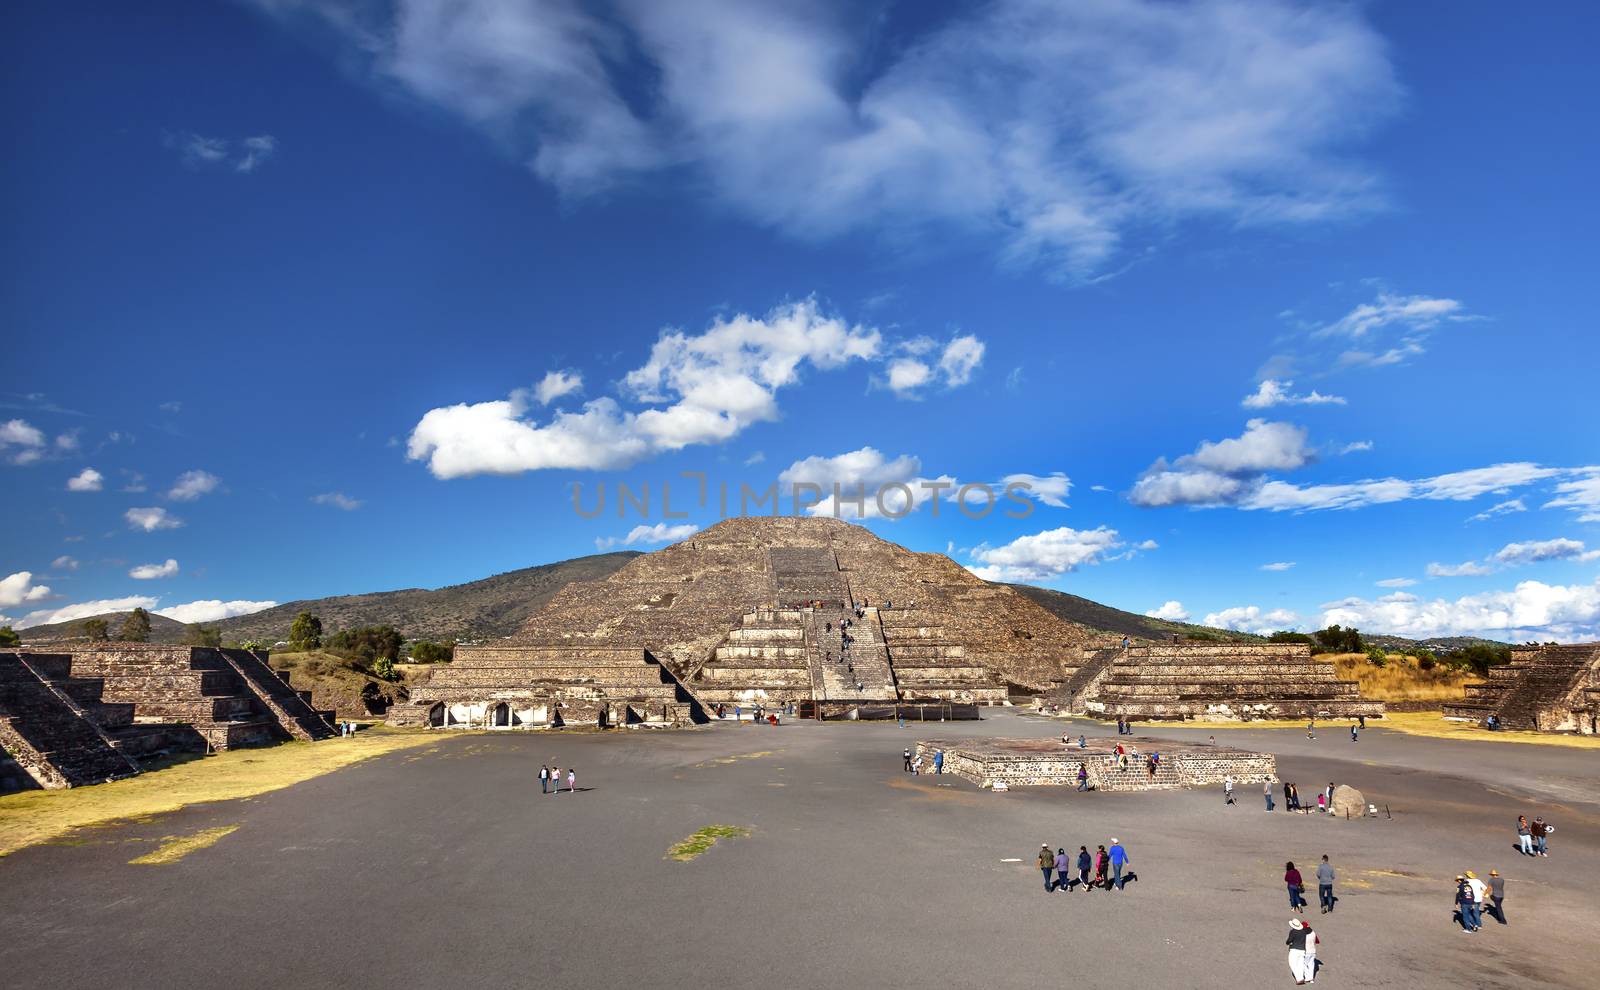 Avenue Dead Temple Moon Pyramid Teotihuacan Mexico City Mexico by bill_perry